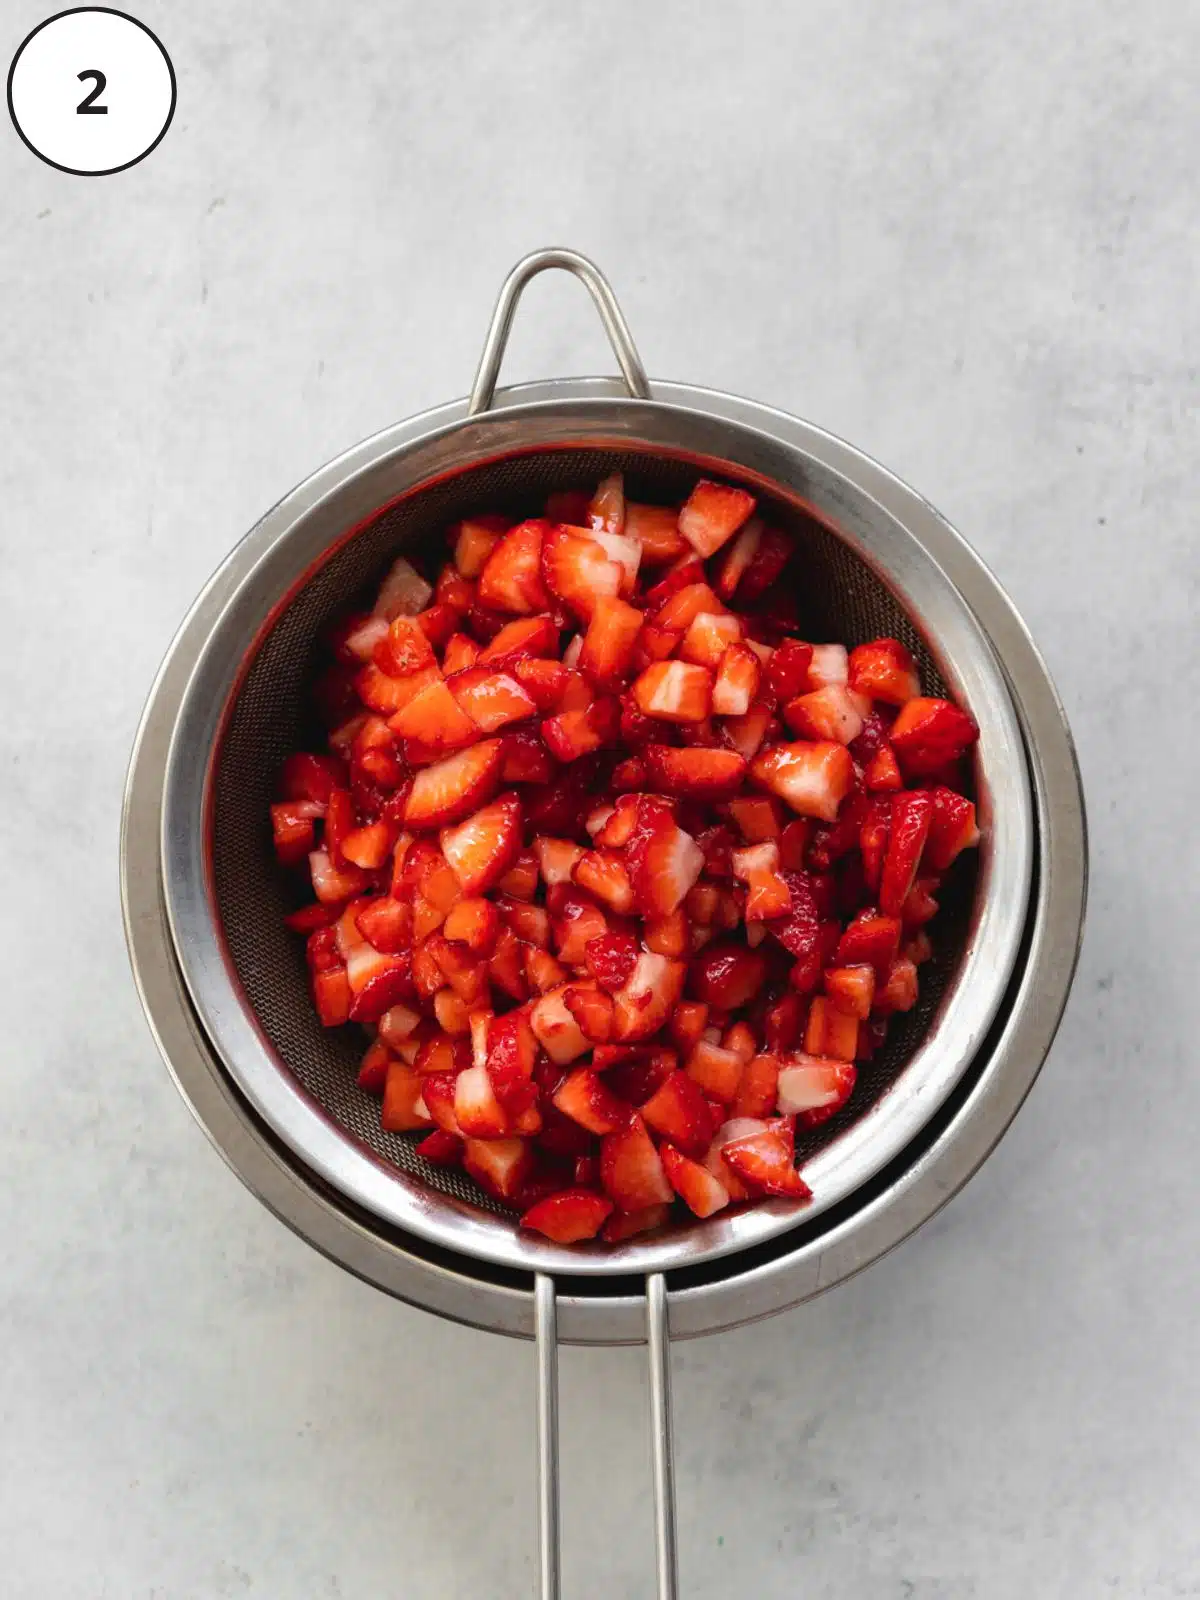 dced strawberries straining over a fine-mesh sieve with a saucepan collecting the juices.